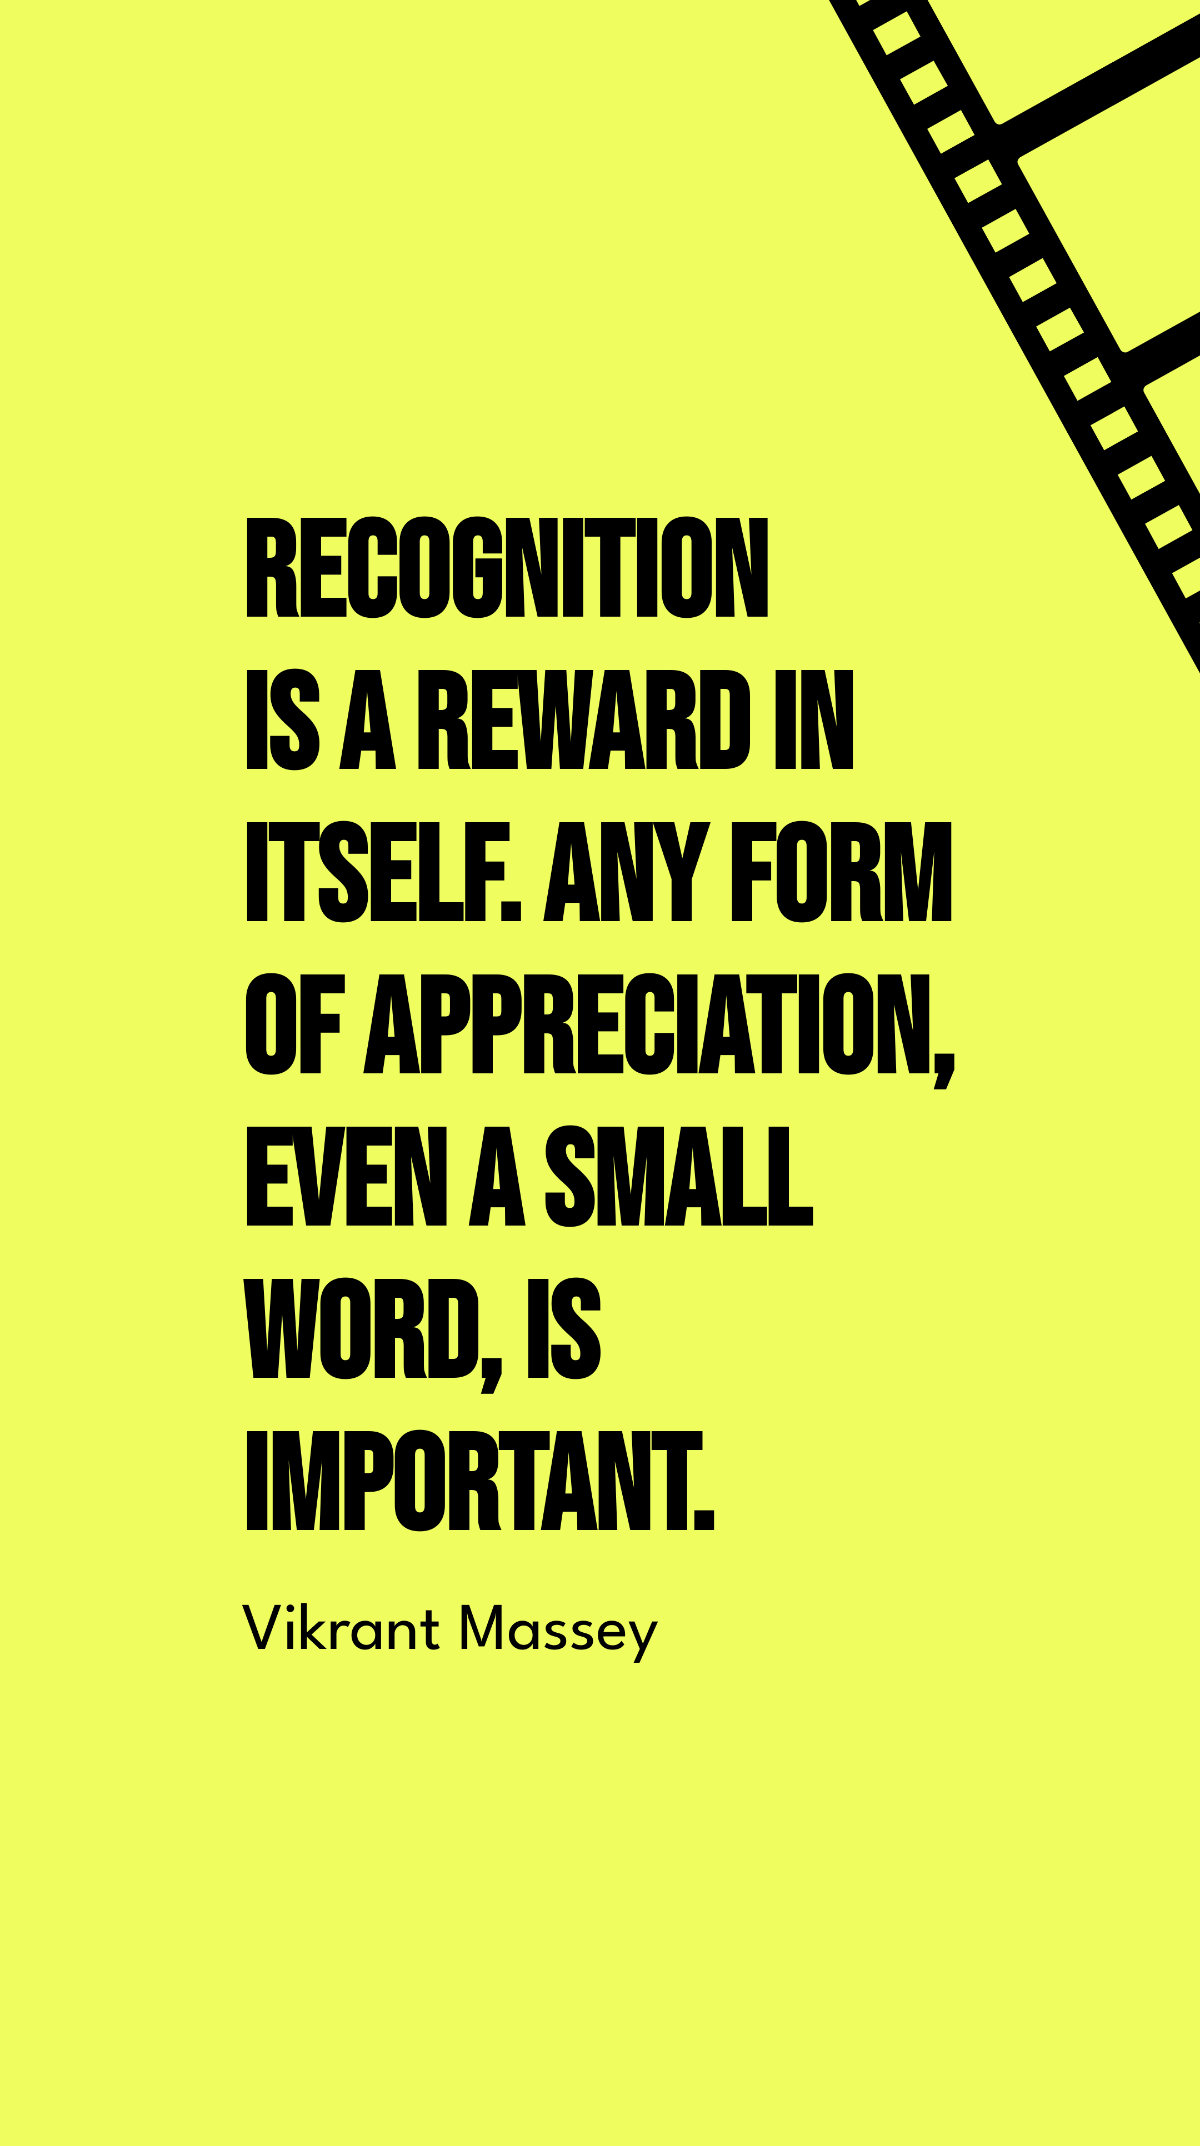 Vikrant Massey - Recognition is a reward in itself. Any form of appreciation, even a small word, is important.